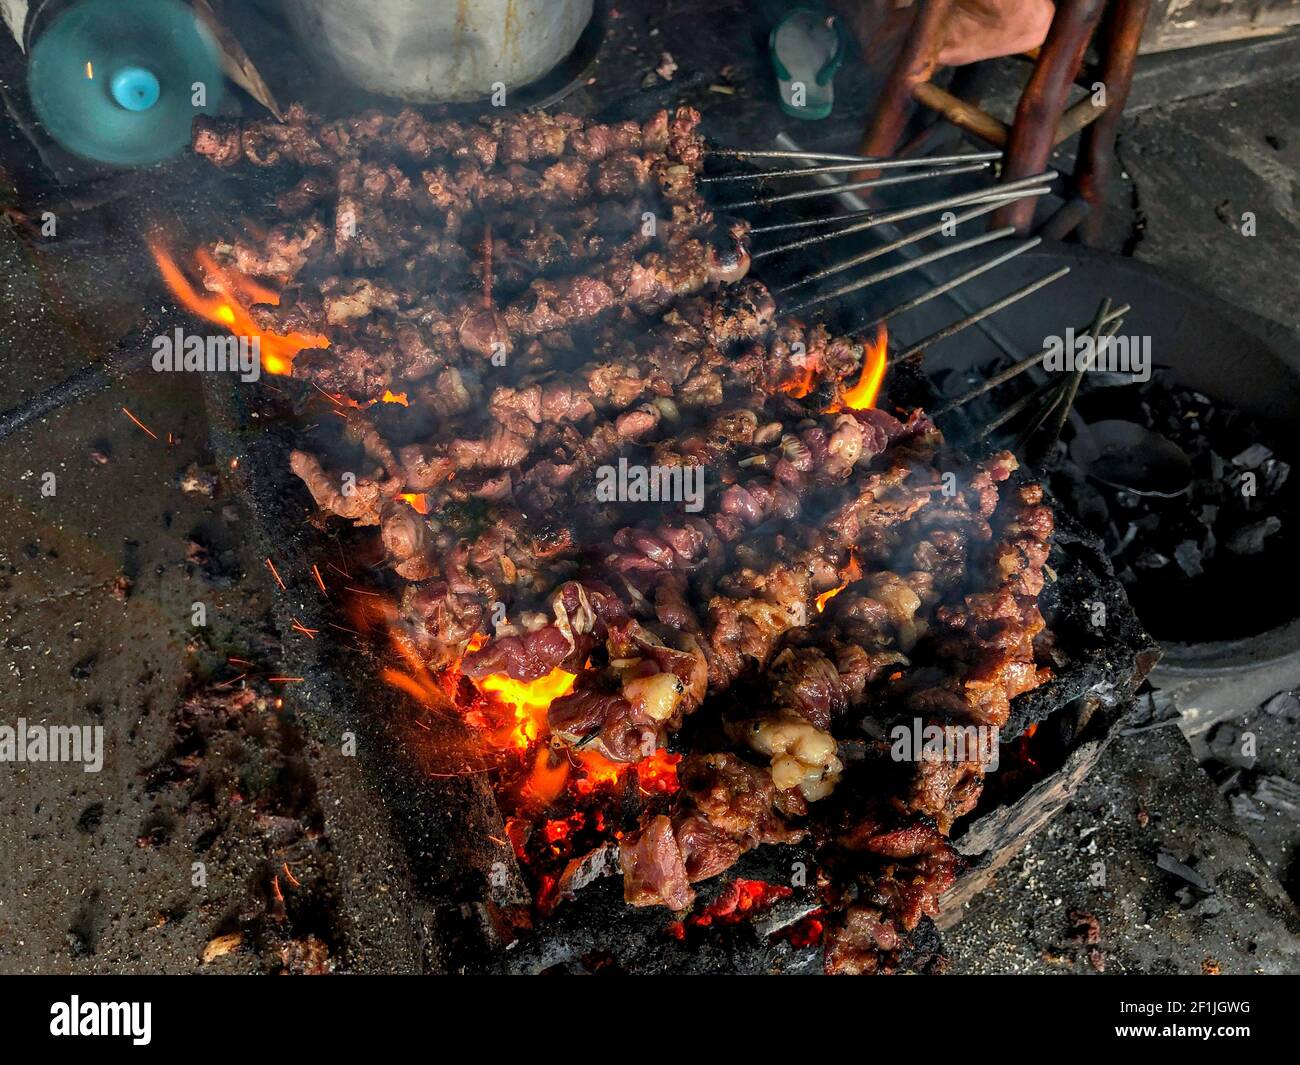 Goat satay on red fire grilling by people. traditional Indonesian food made from mutton. Stock Photo